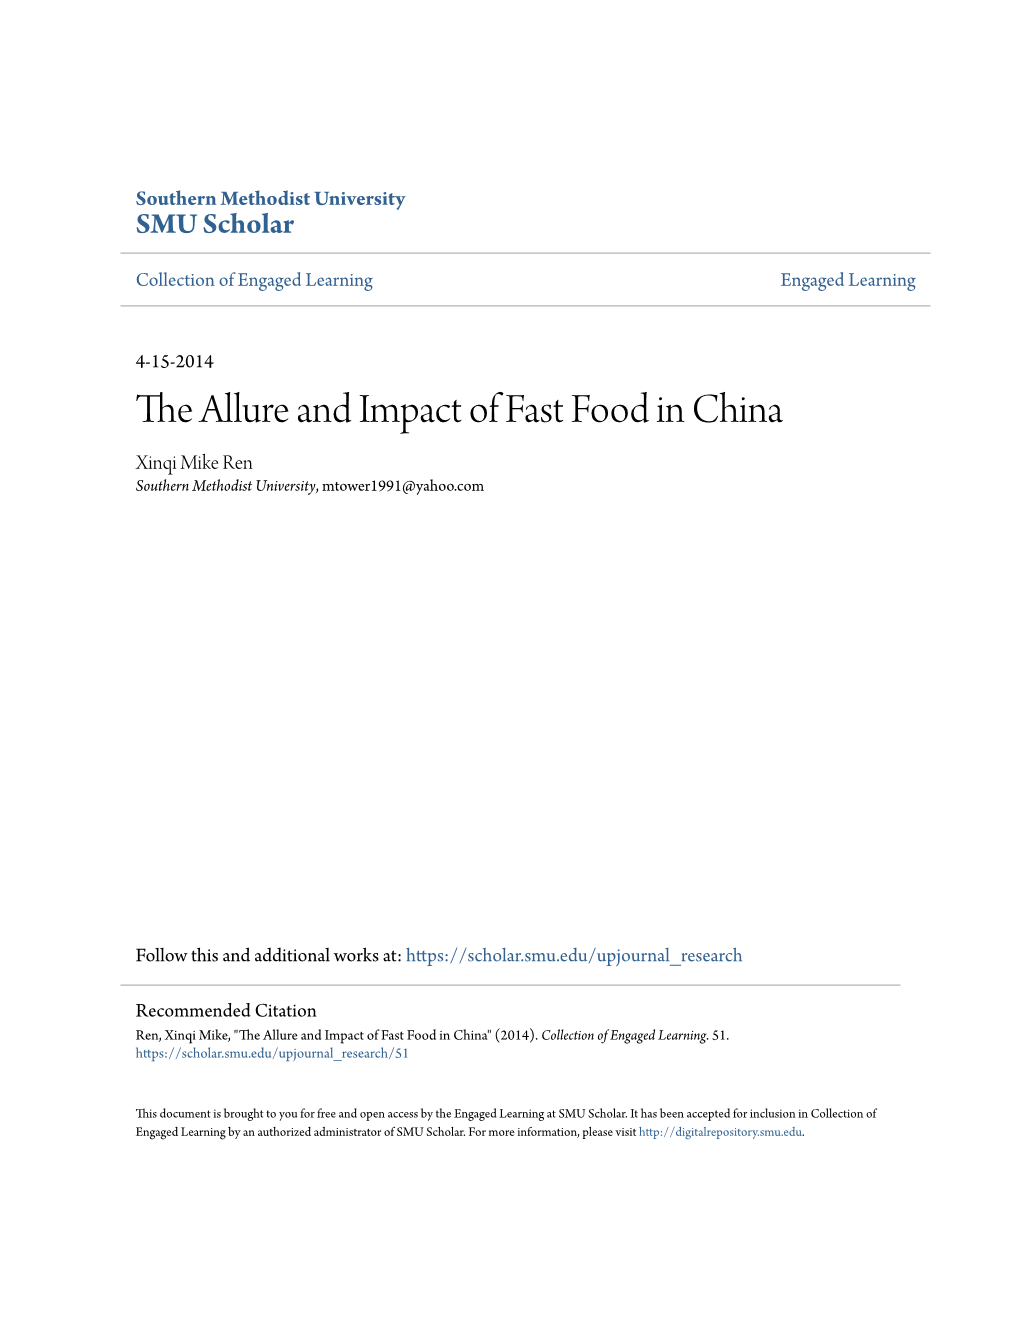 The Allure and Impact of Fast Food in China Xinqi Mike Ren Southern Methodist University, Mtower1991@Yahoo.Com